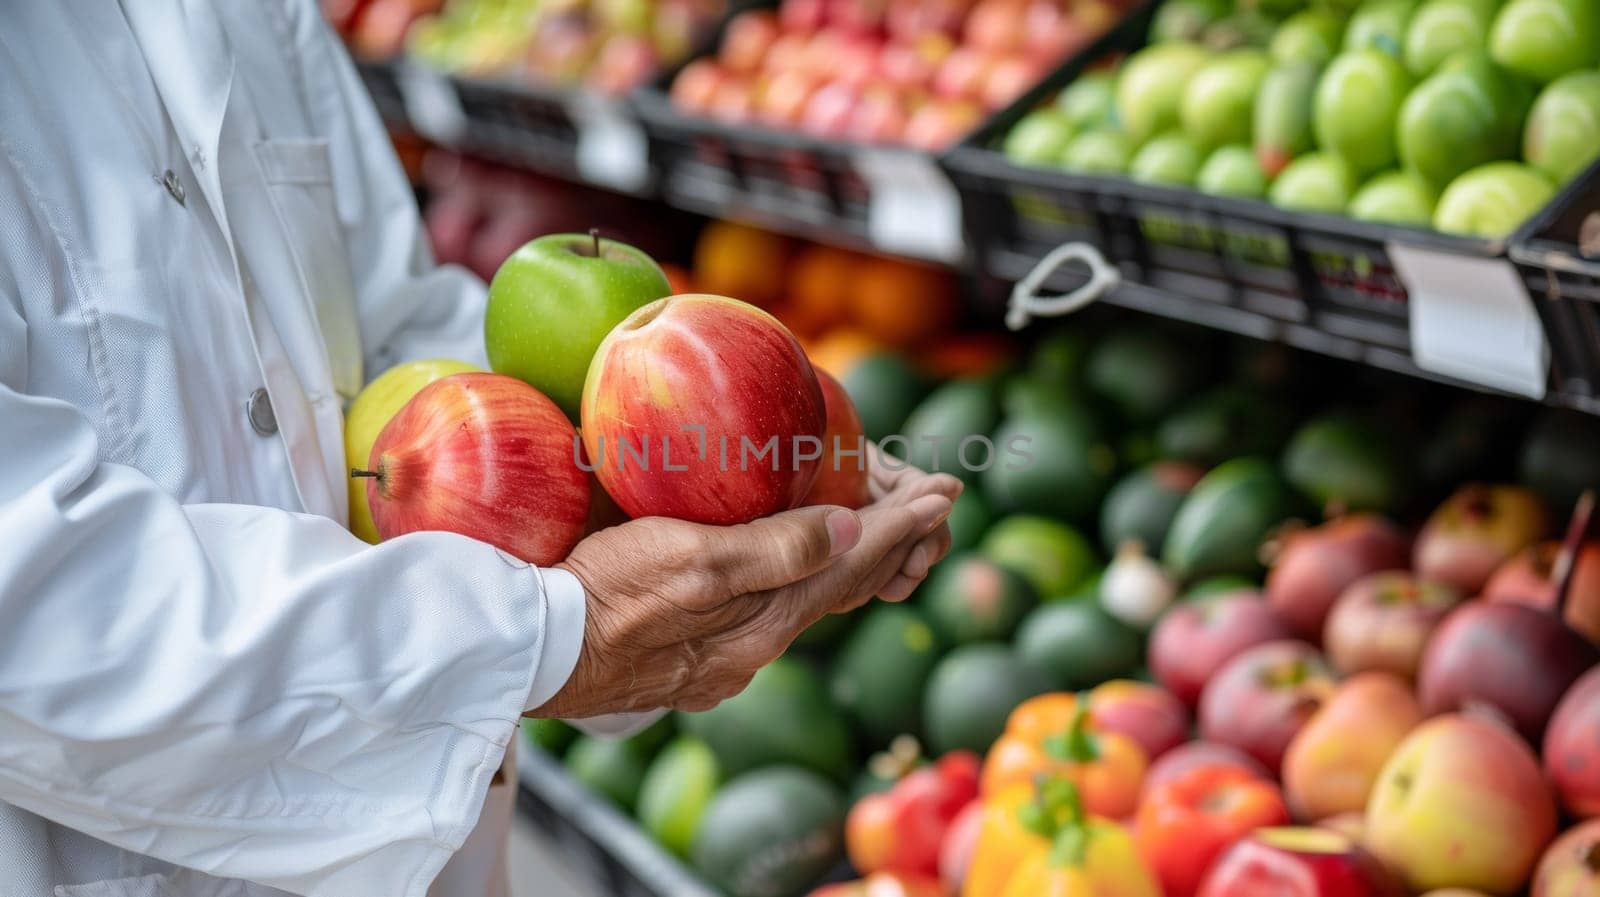 A person holding a basket of apples in front of produce, AI by starush